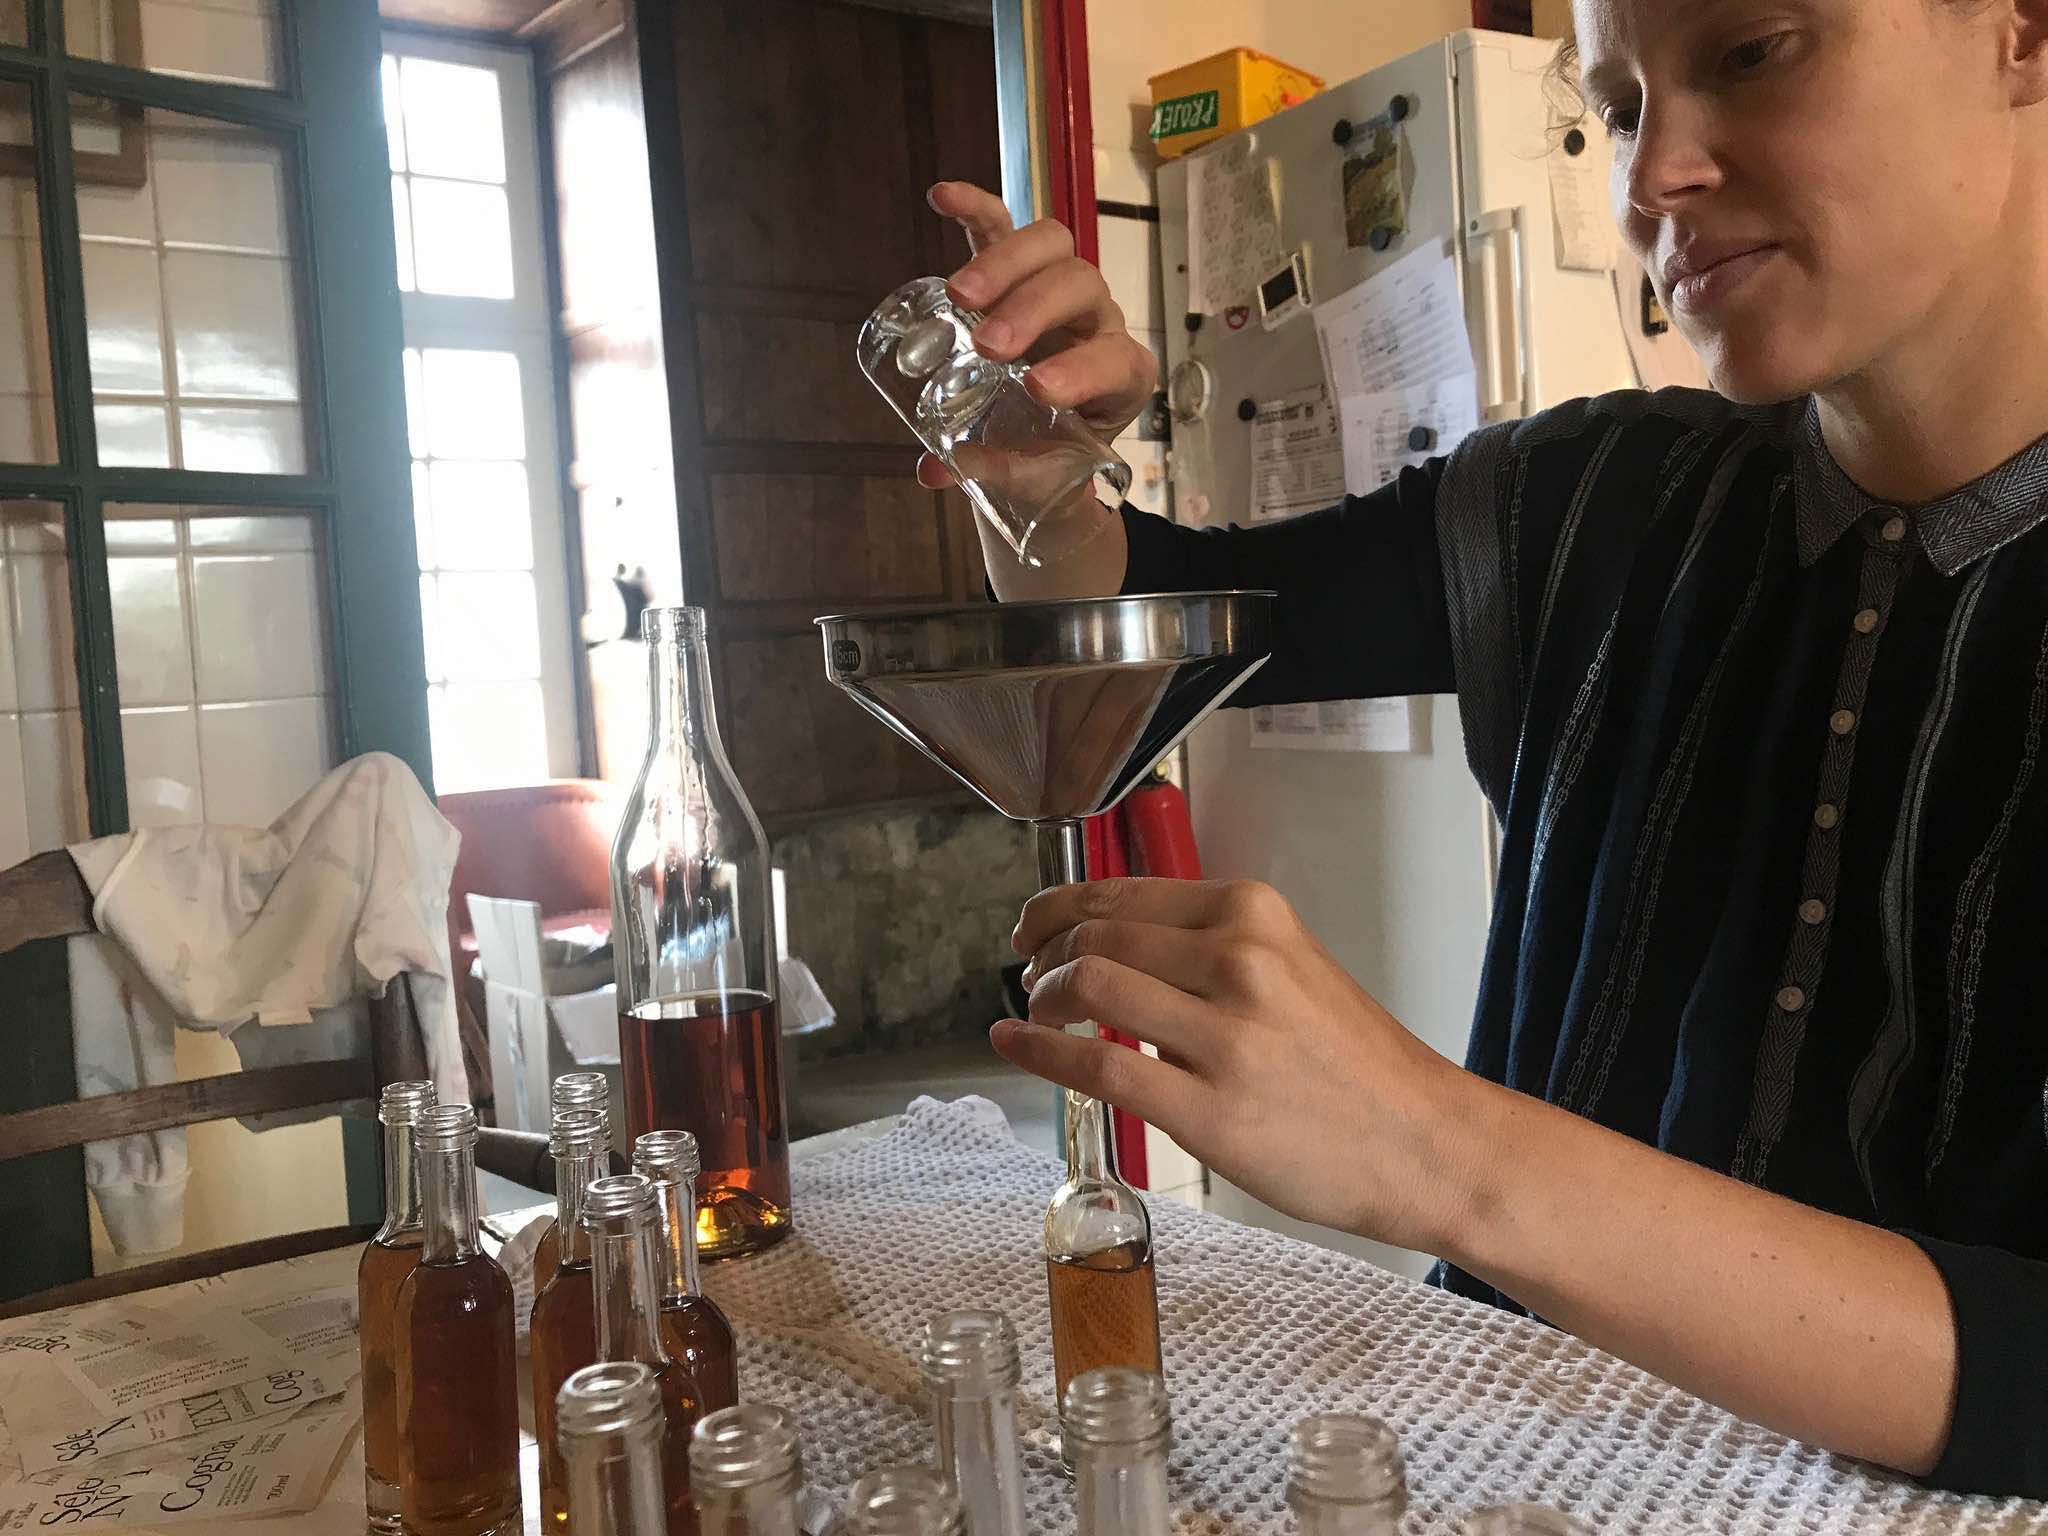 The Making Of: Sophie & Max Sélection N° 2 Limited Edition Cognac